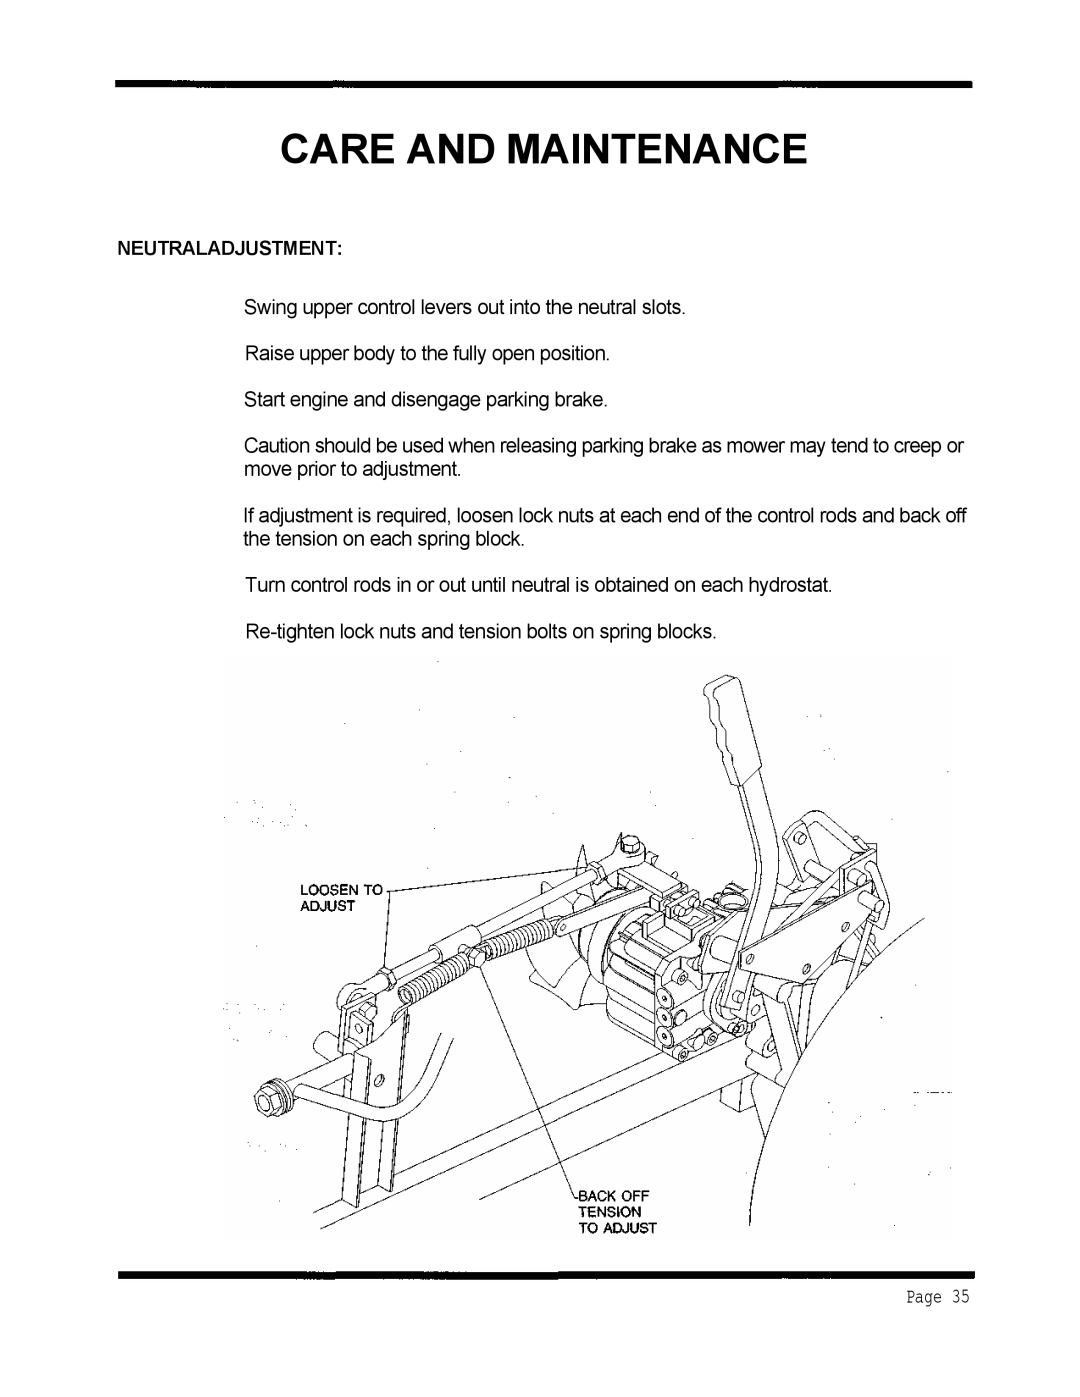 Dixon ZTR 5424, ZTR 5020 manual Care And Maintenance, Page, Neutraladjustment 